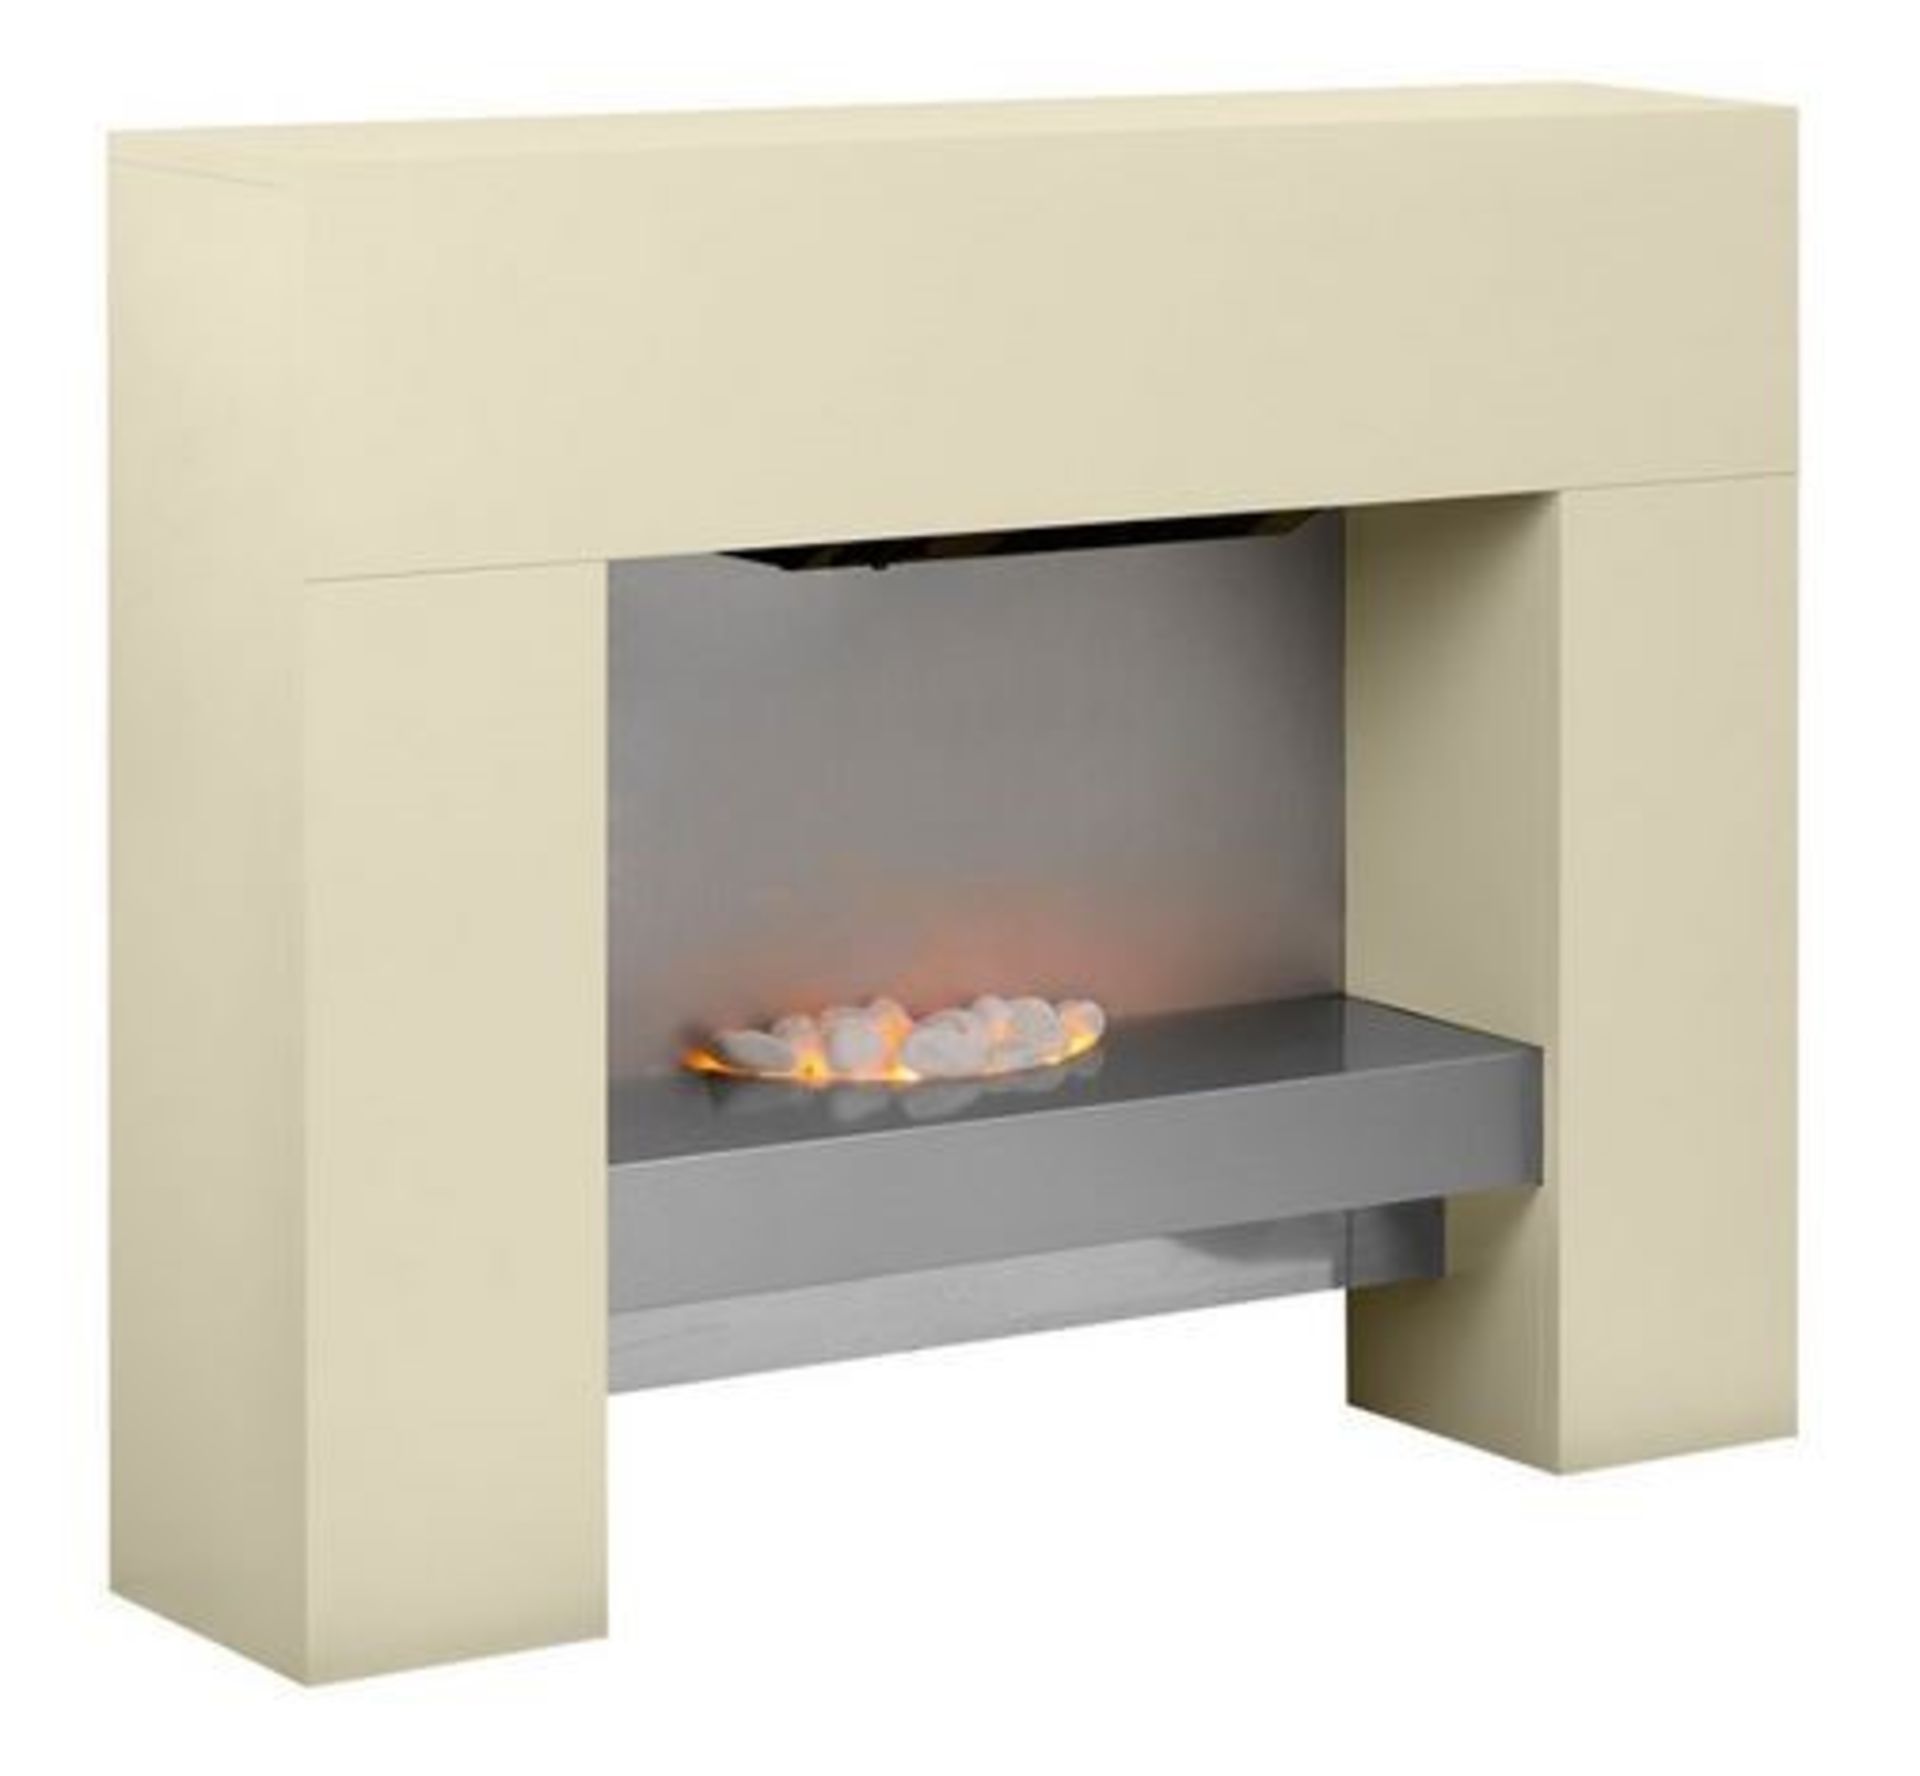 1 BOXED WARMLITE 2000W FIREPLACE SUITE / RRP £197.48 (PUBLIC VIEWING AVAILABLE)